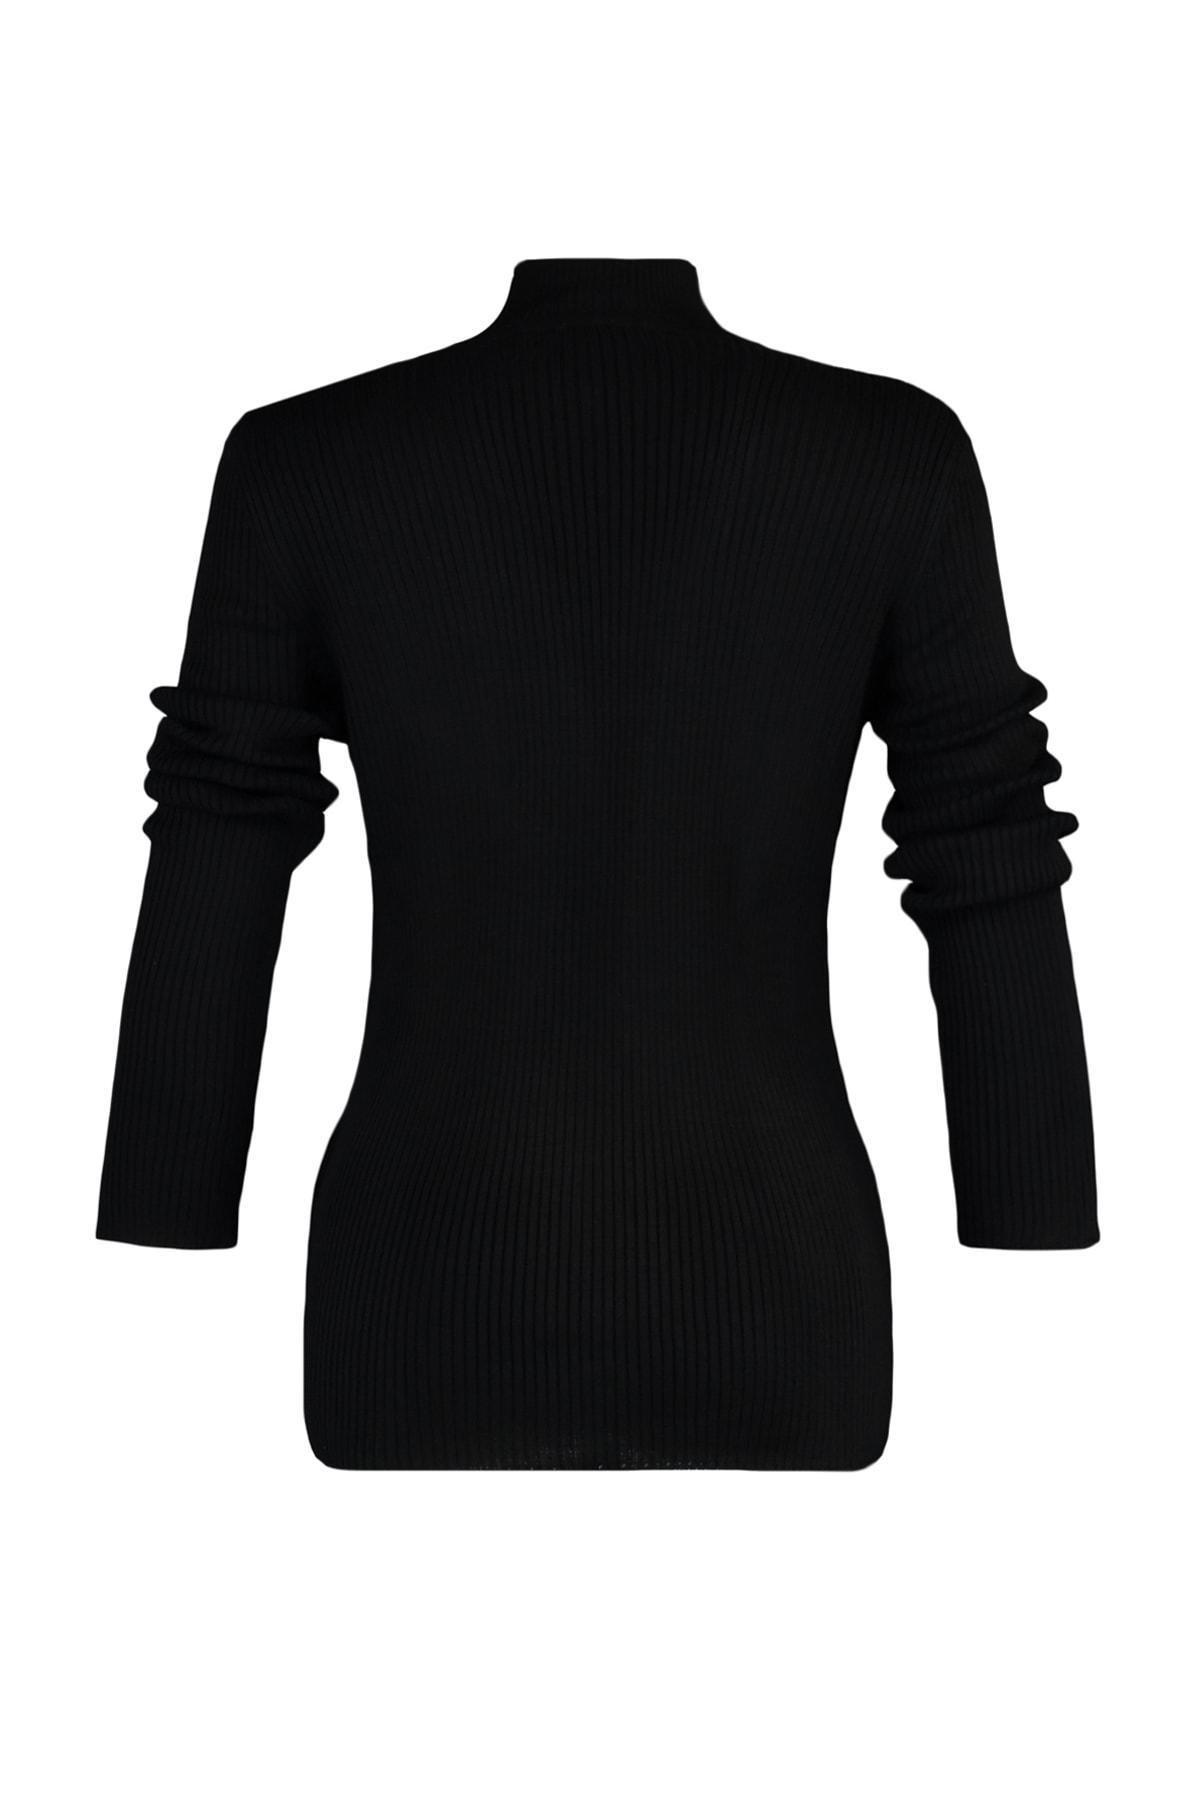 Trendyol - Black Knitted Plus Size Sweater